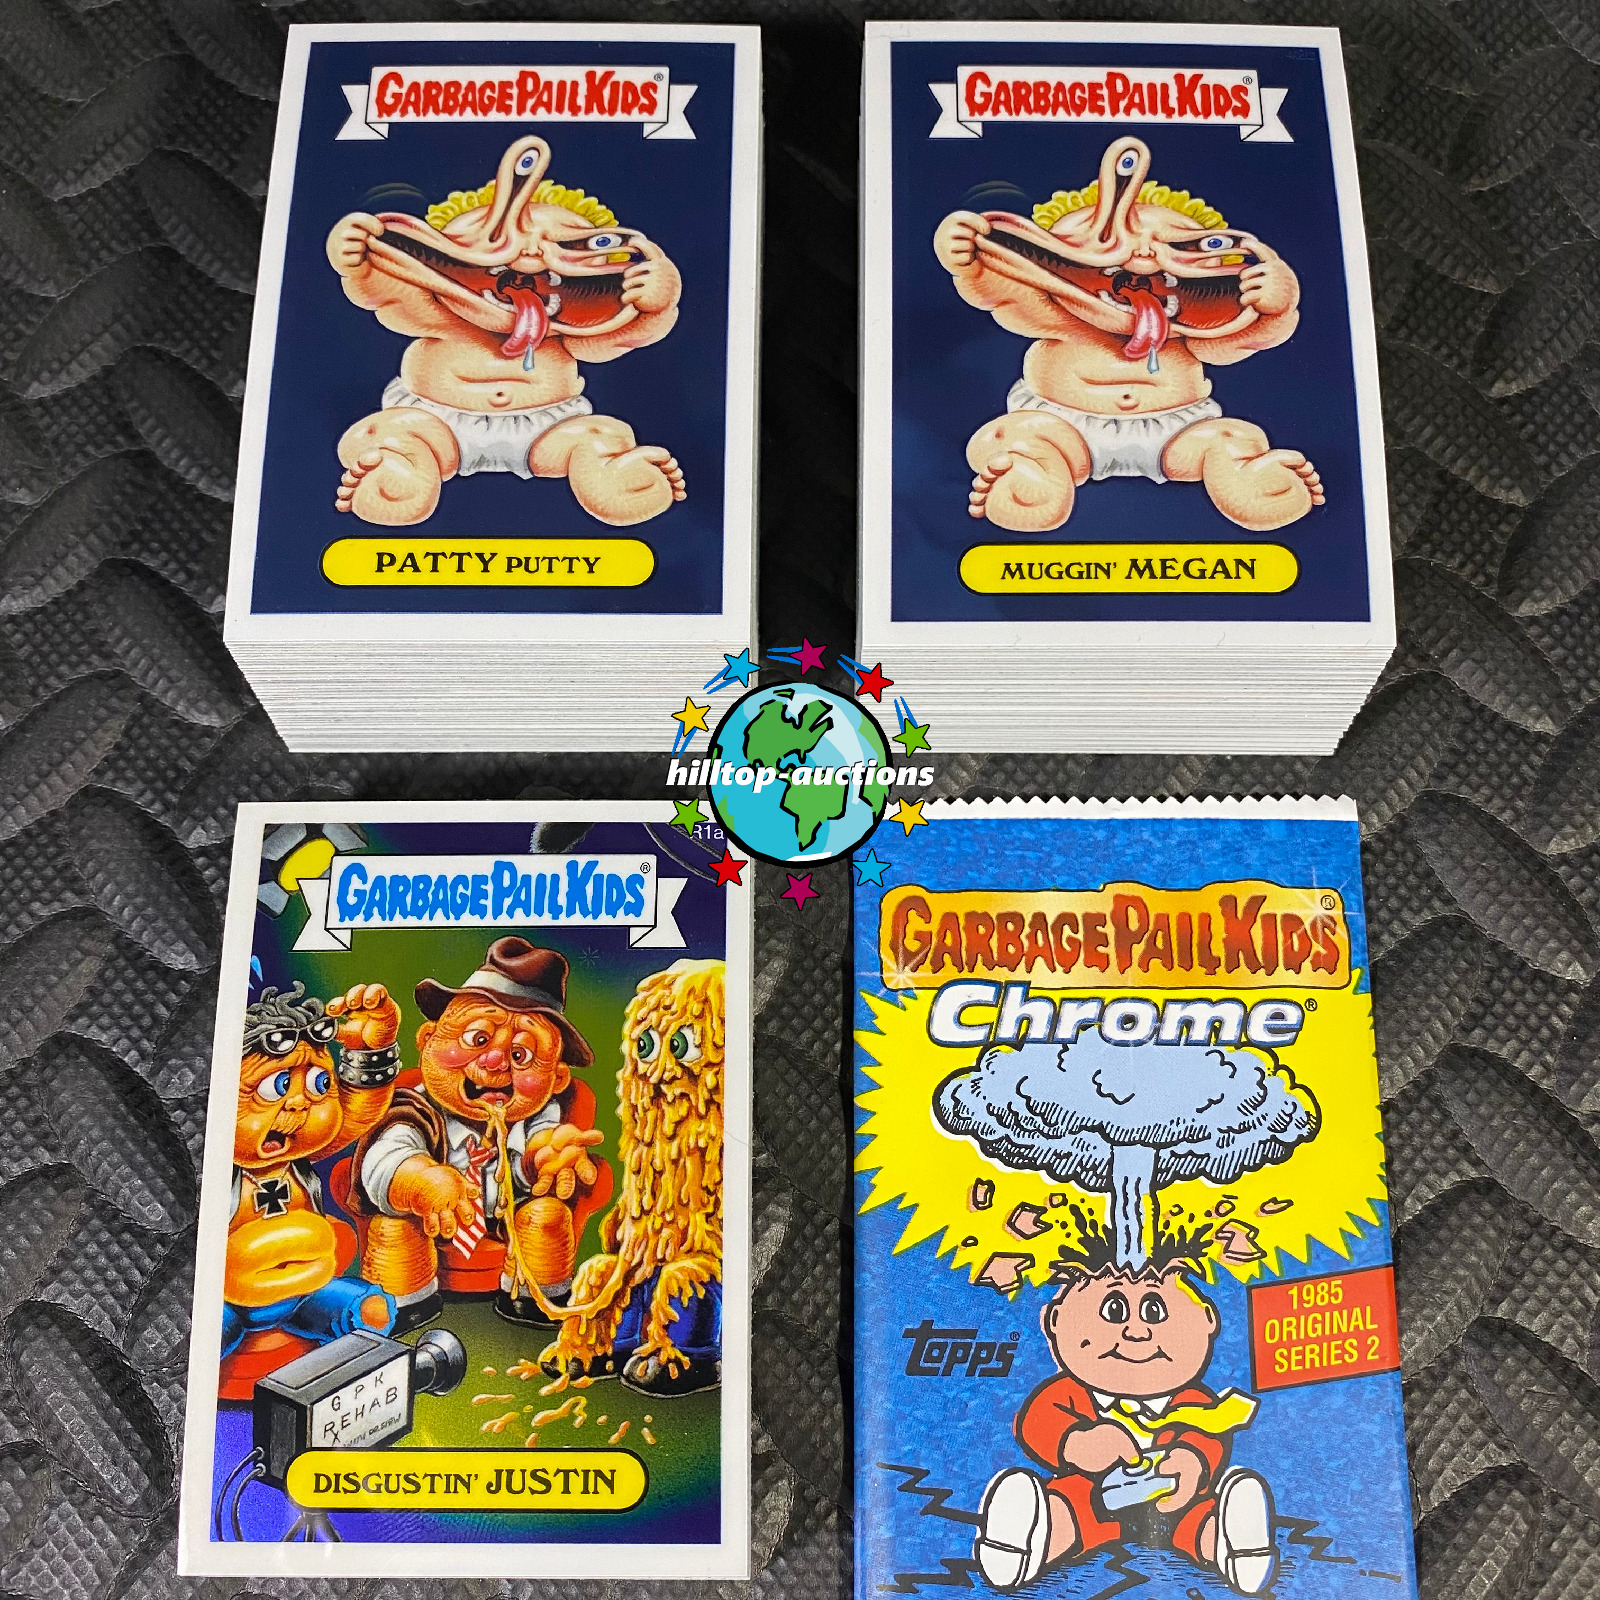 GARBAGE PAIL KIDS CHROME 2 COMPLETE 110-CARD BASE SET +WRAPPER 2014 2ND SERIES